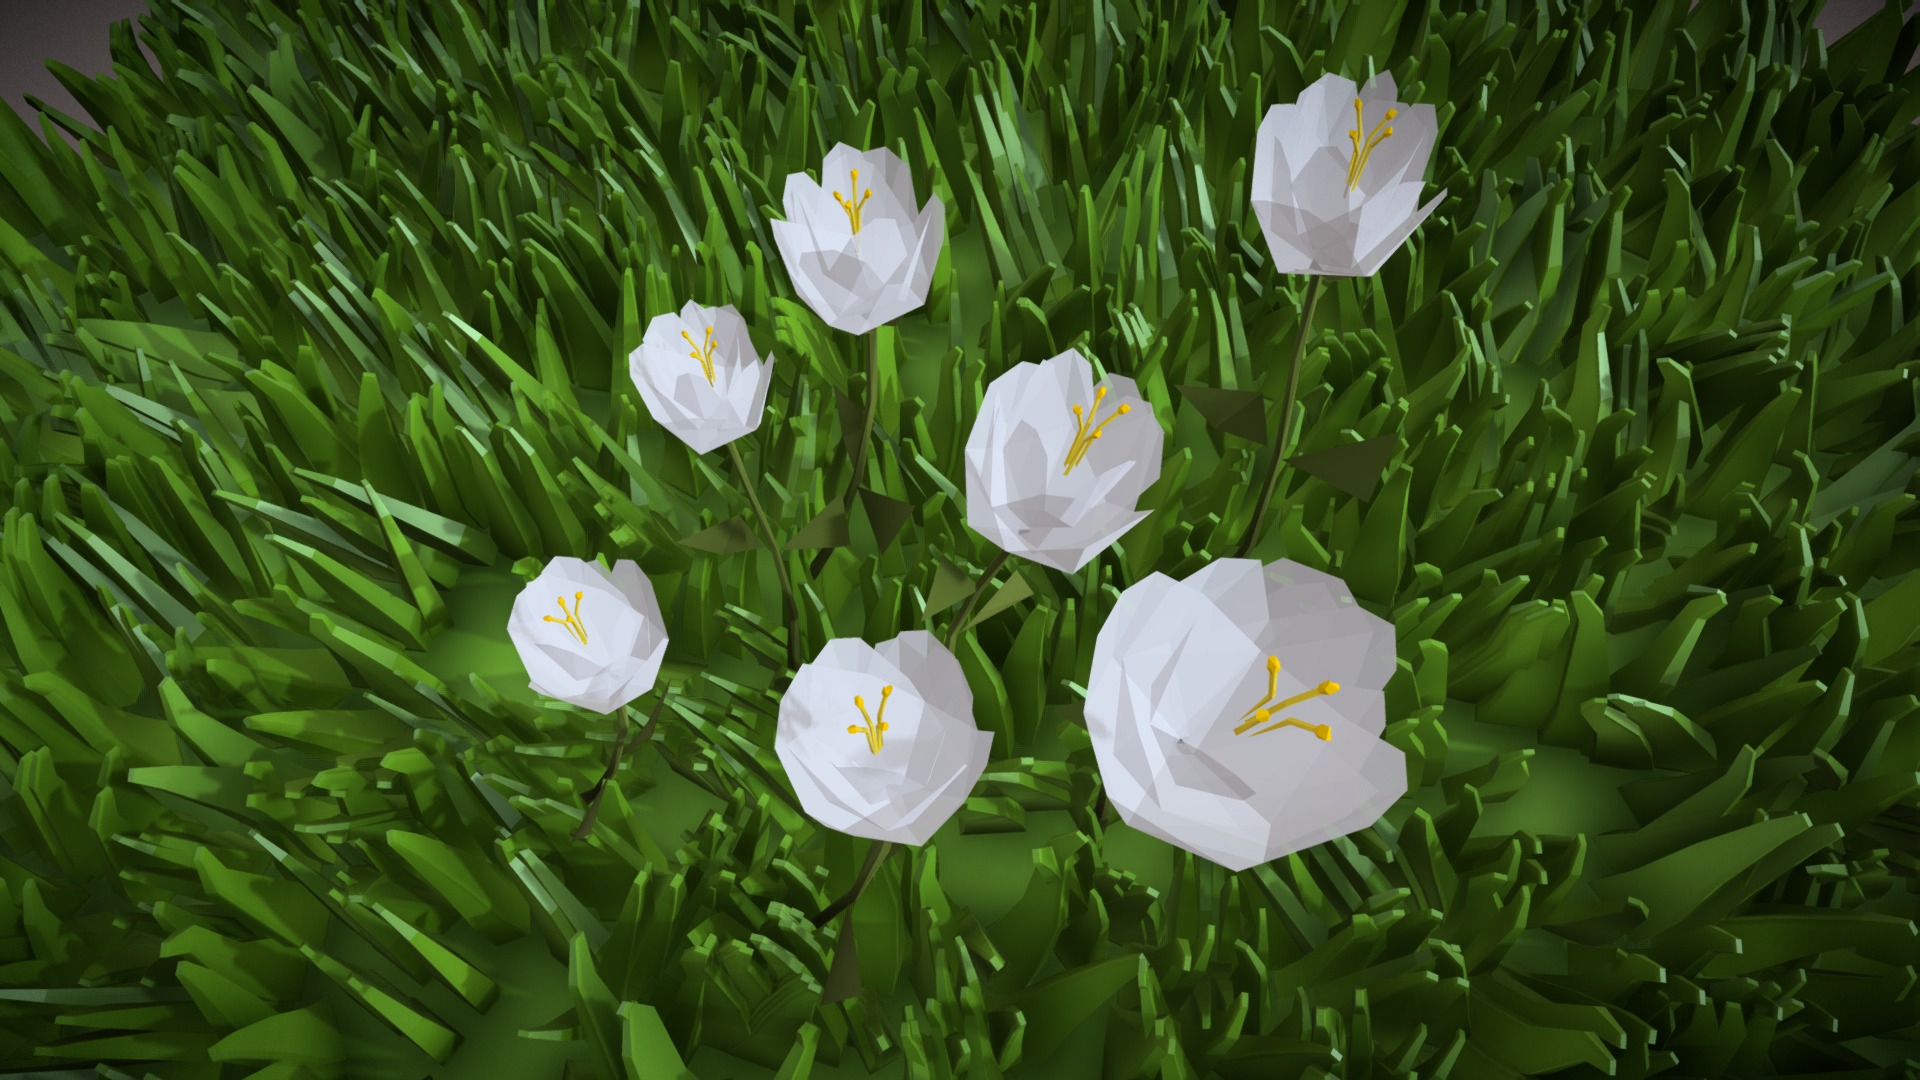 3D model Low Poly Grass and Flower - This is a 3D model of the Low Poly Grass and Flower. The 3D model is about a group of white flowers.